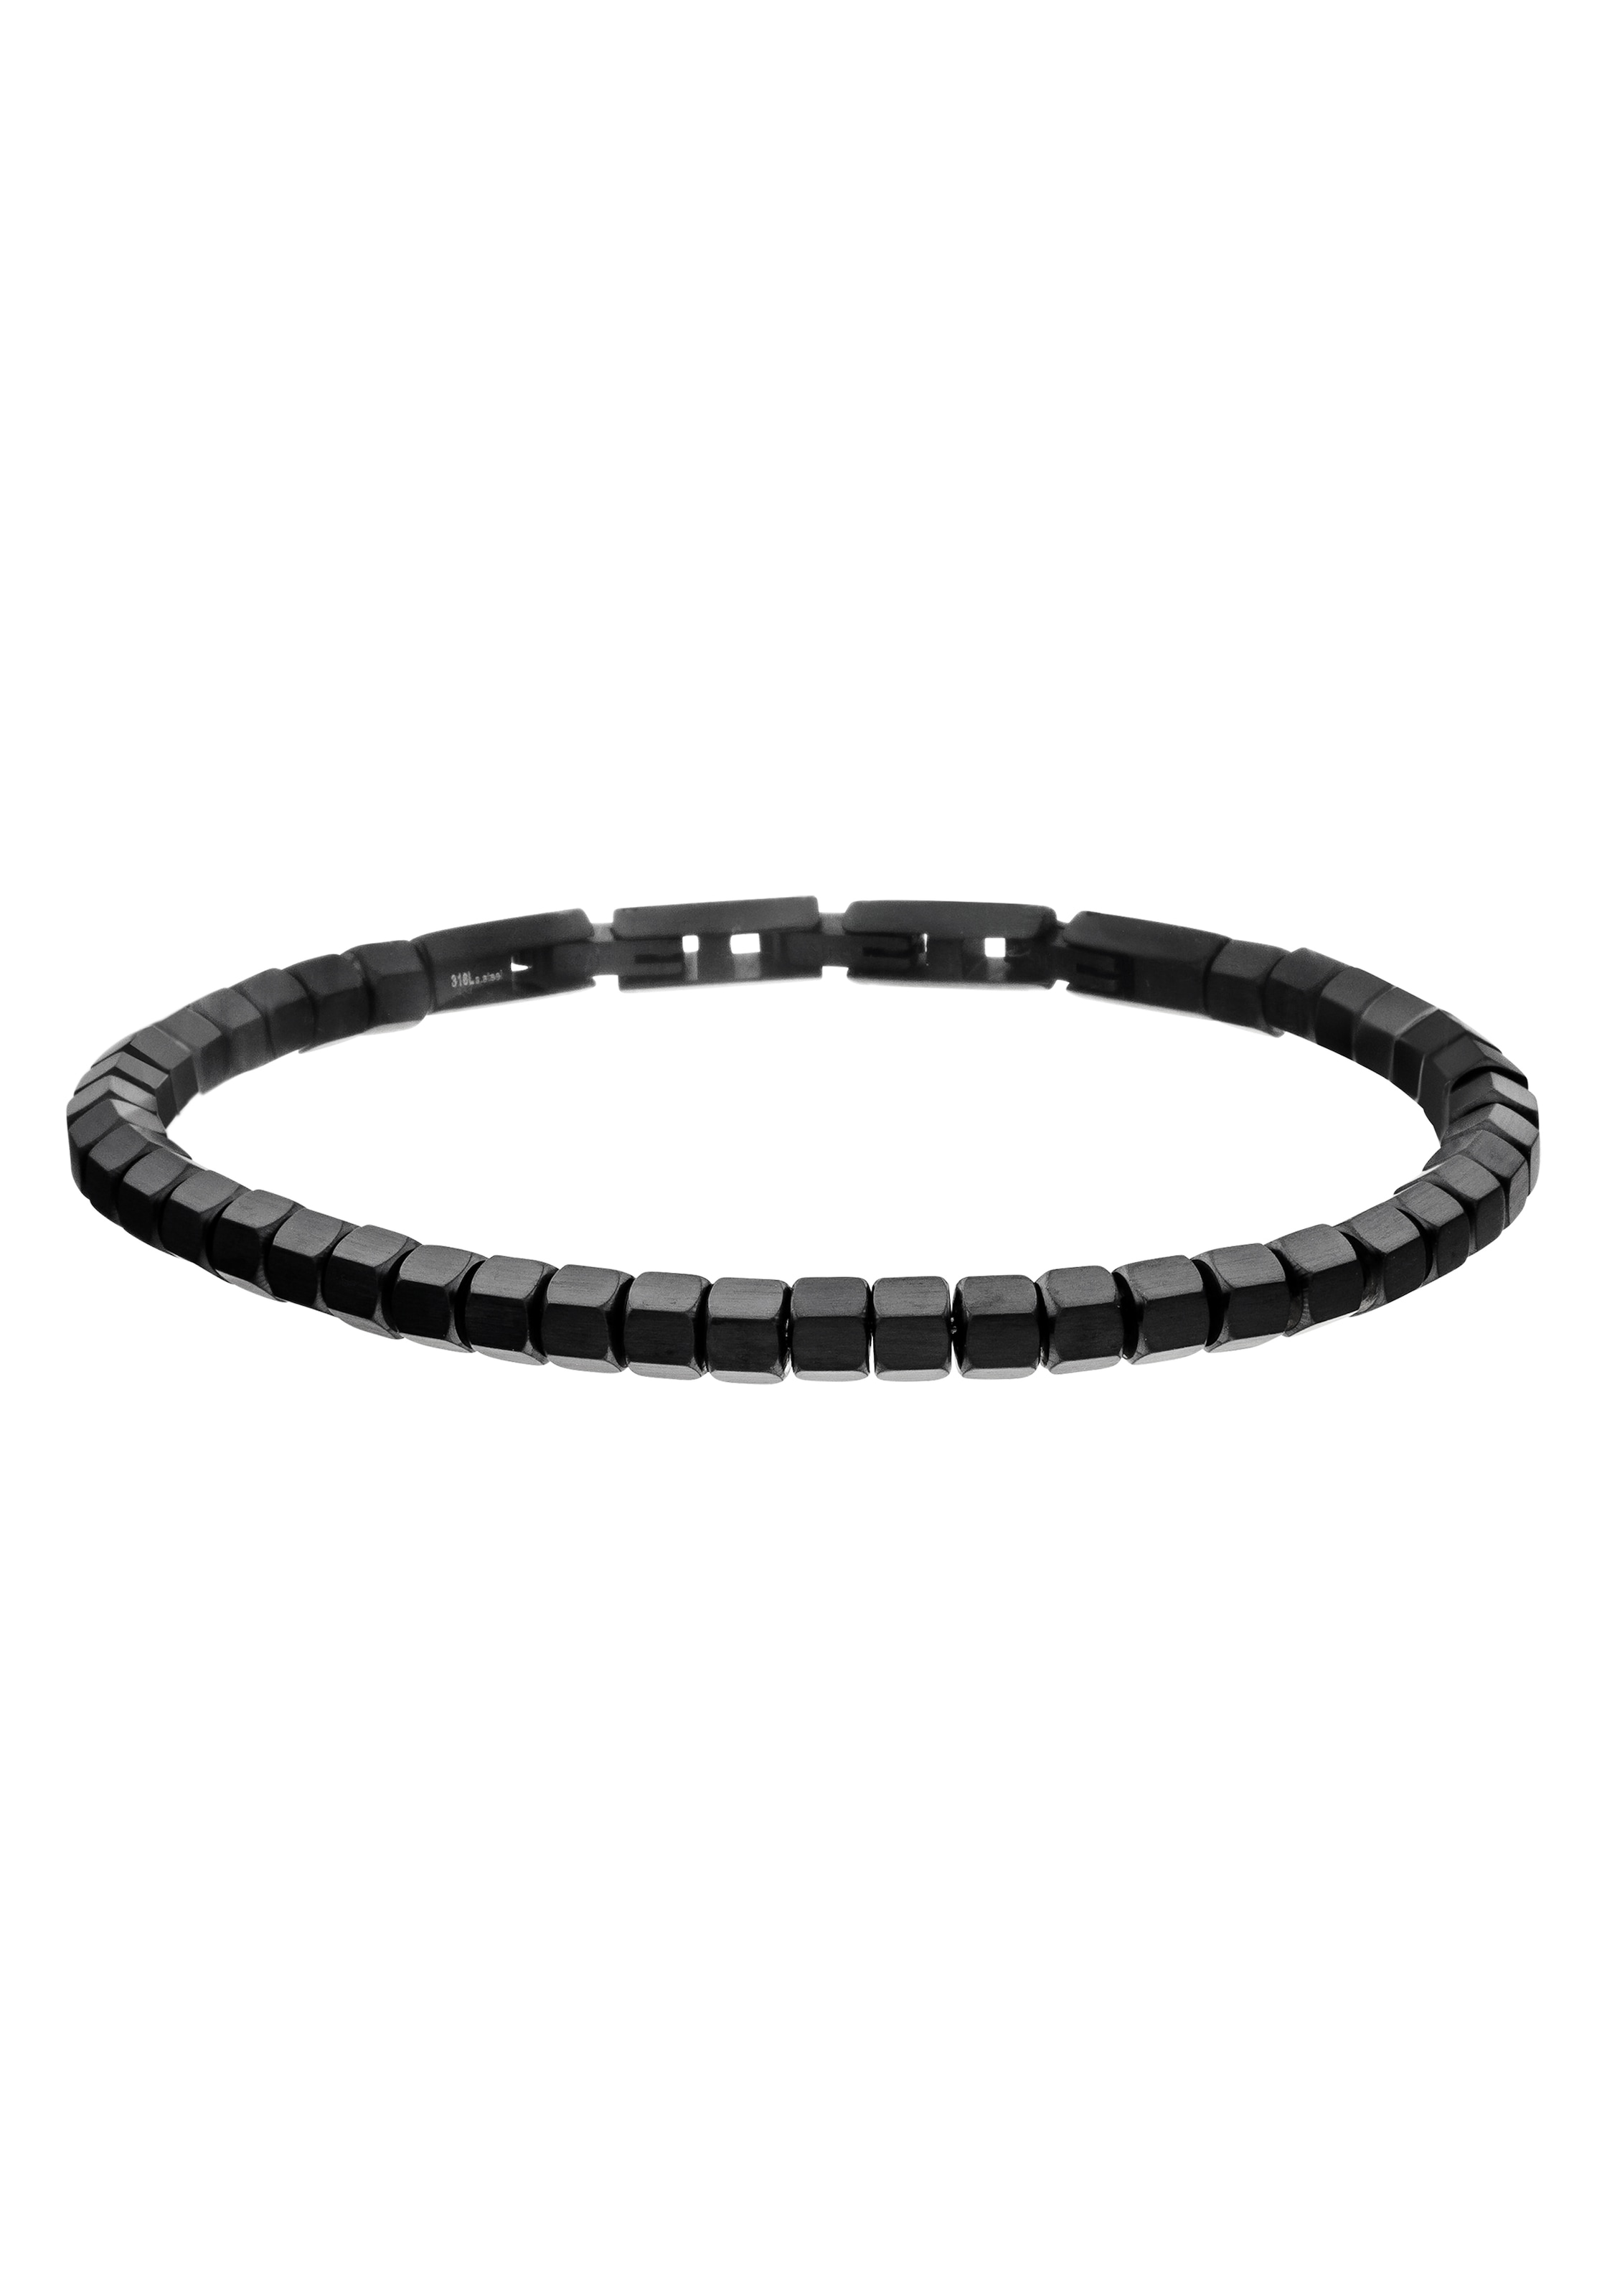 STEELWEAR Armband Aires, online shoppen OTTO SW-687« bei SW-686, »Buenos